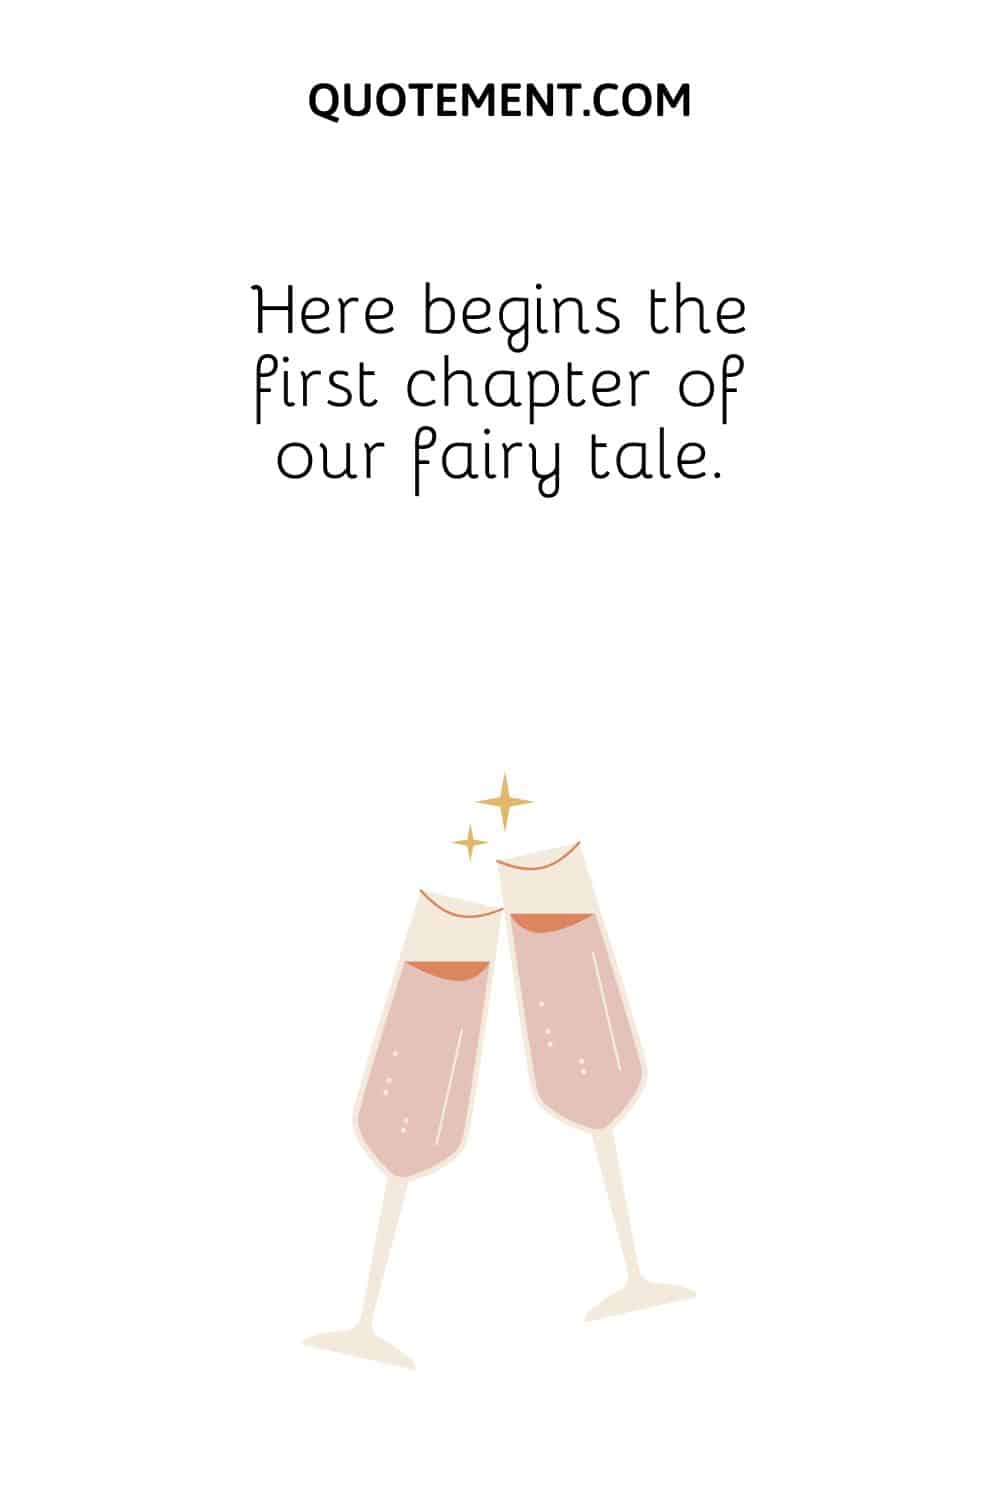 Here begins the first chapter of our fairy tale.